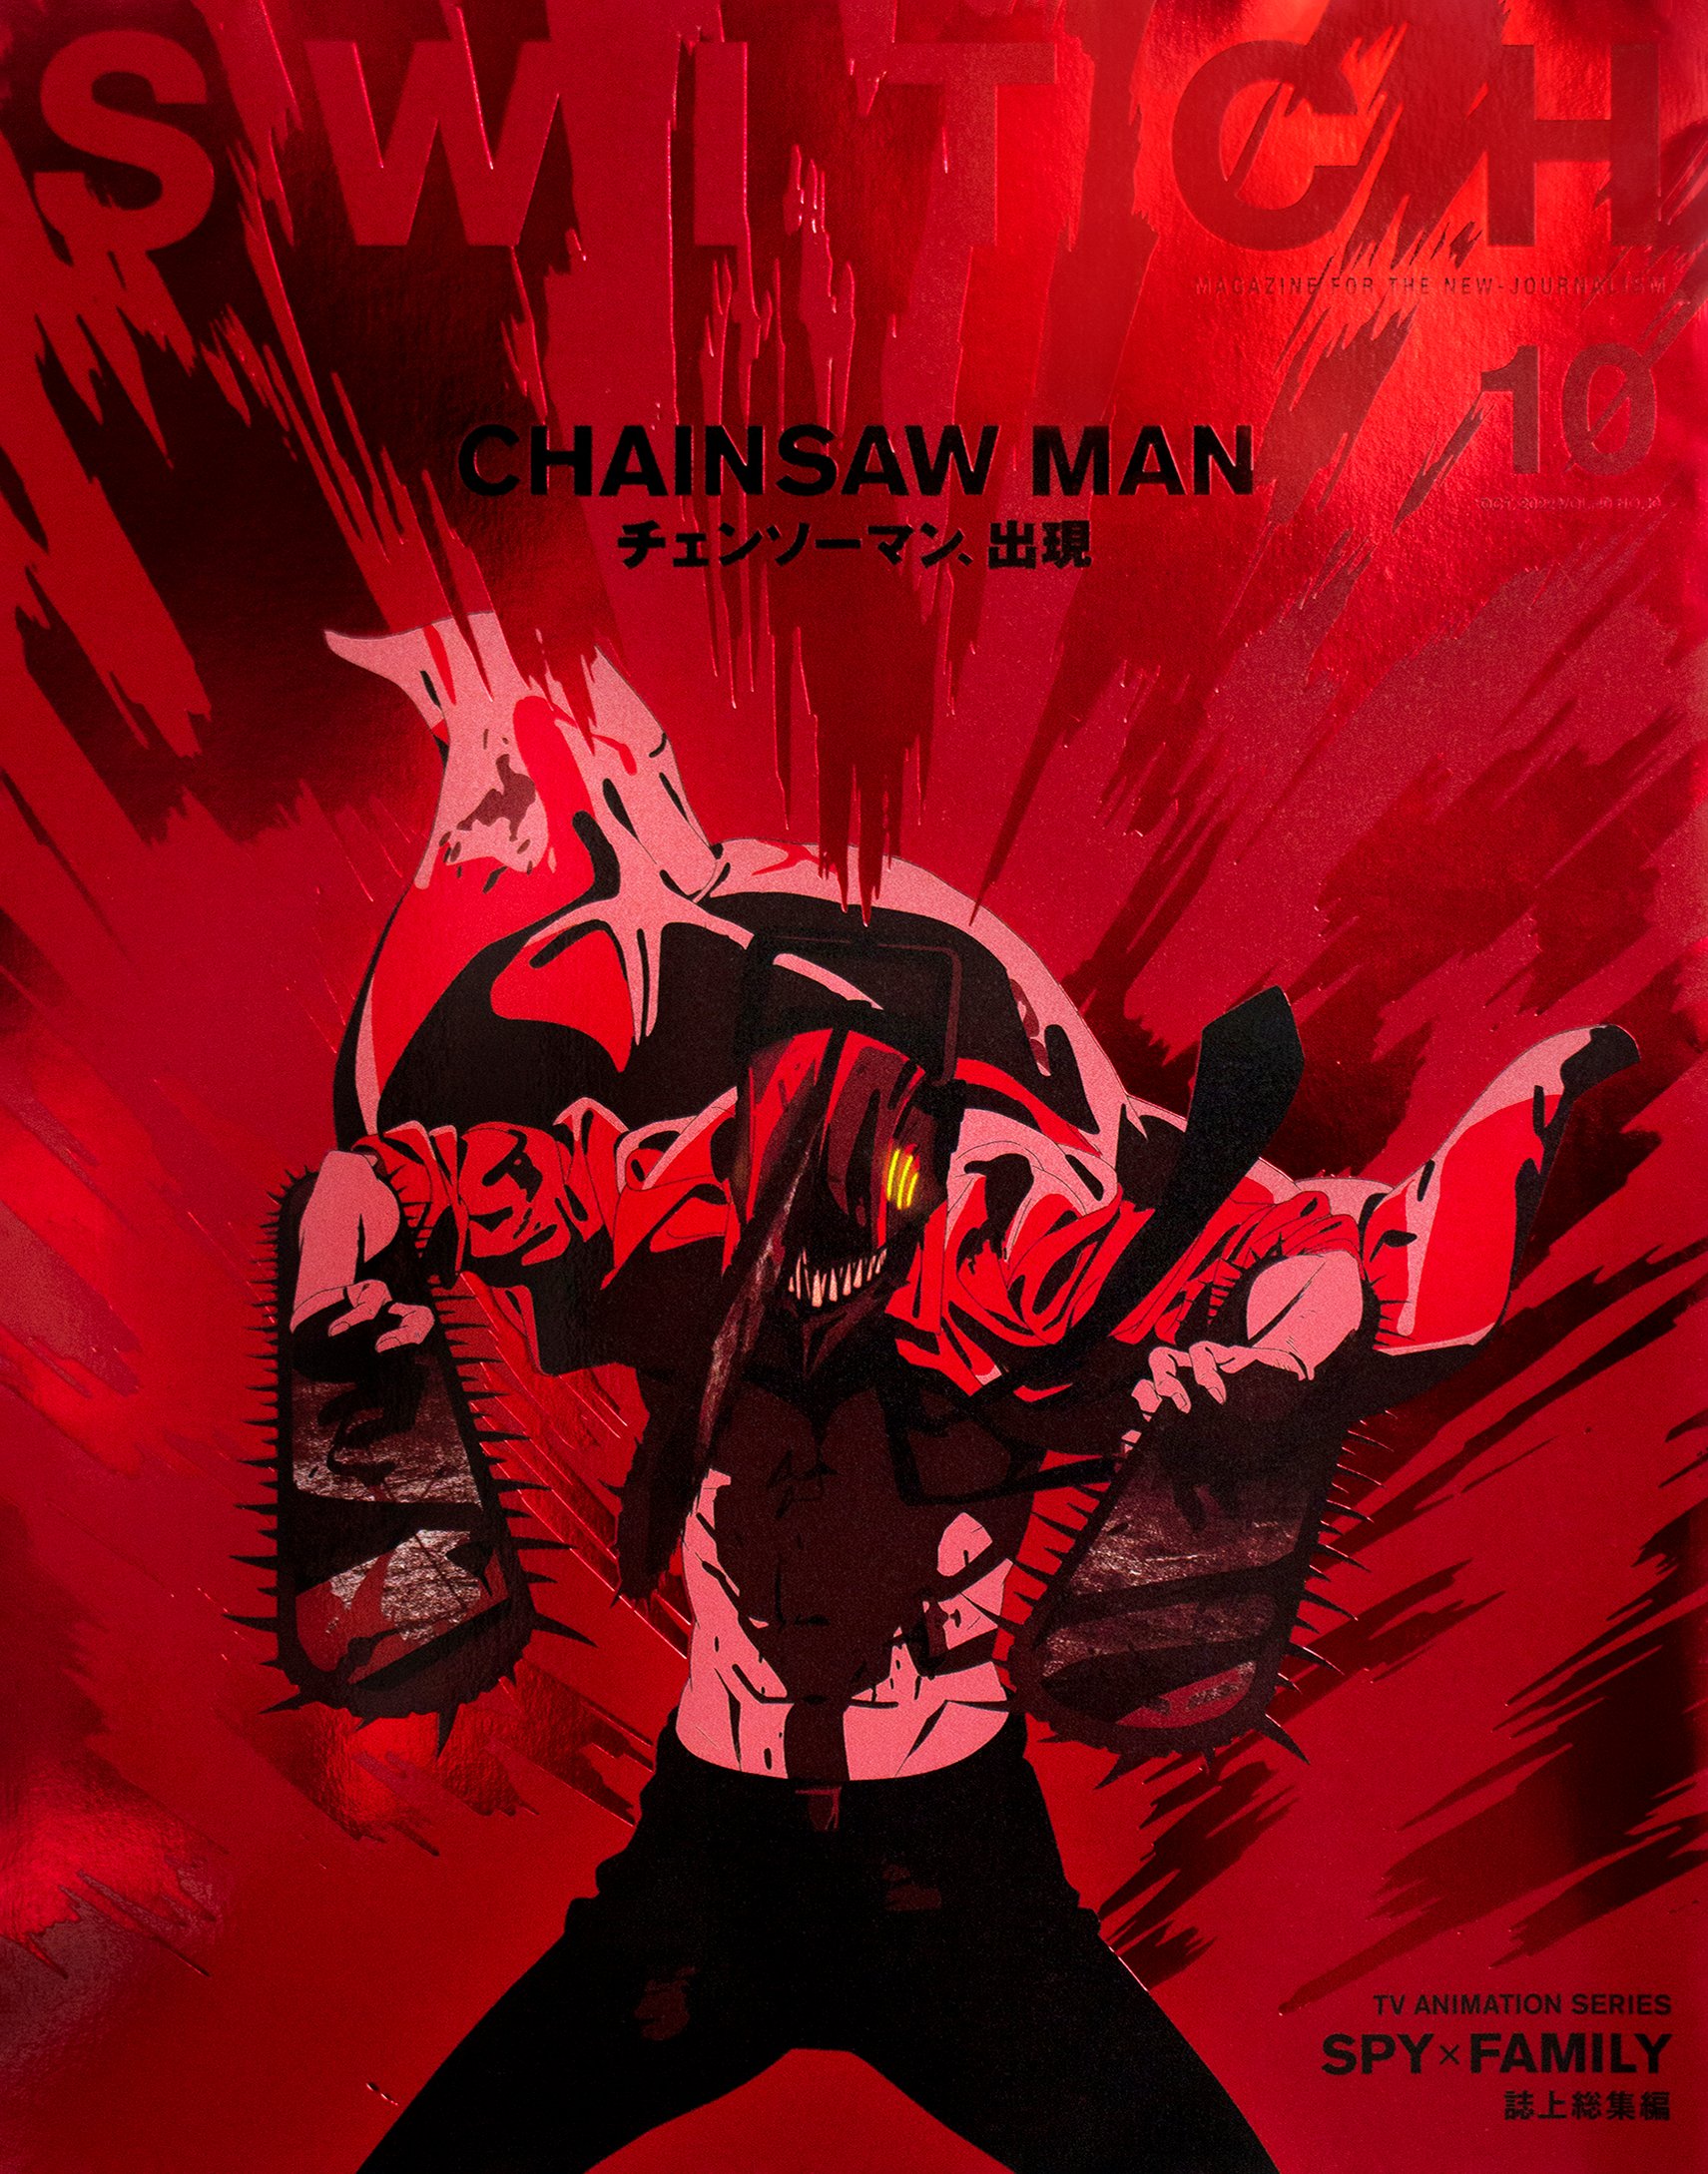 Japanese Magazine SWITCH Reveals Dynamic Chainsaw Man Cover ...